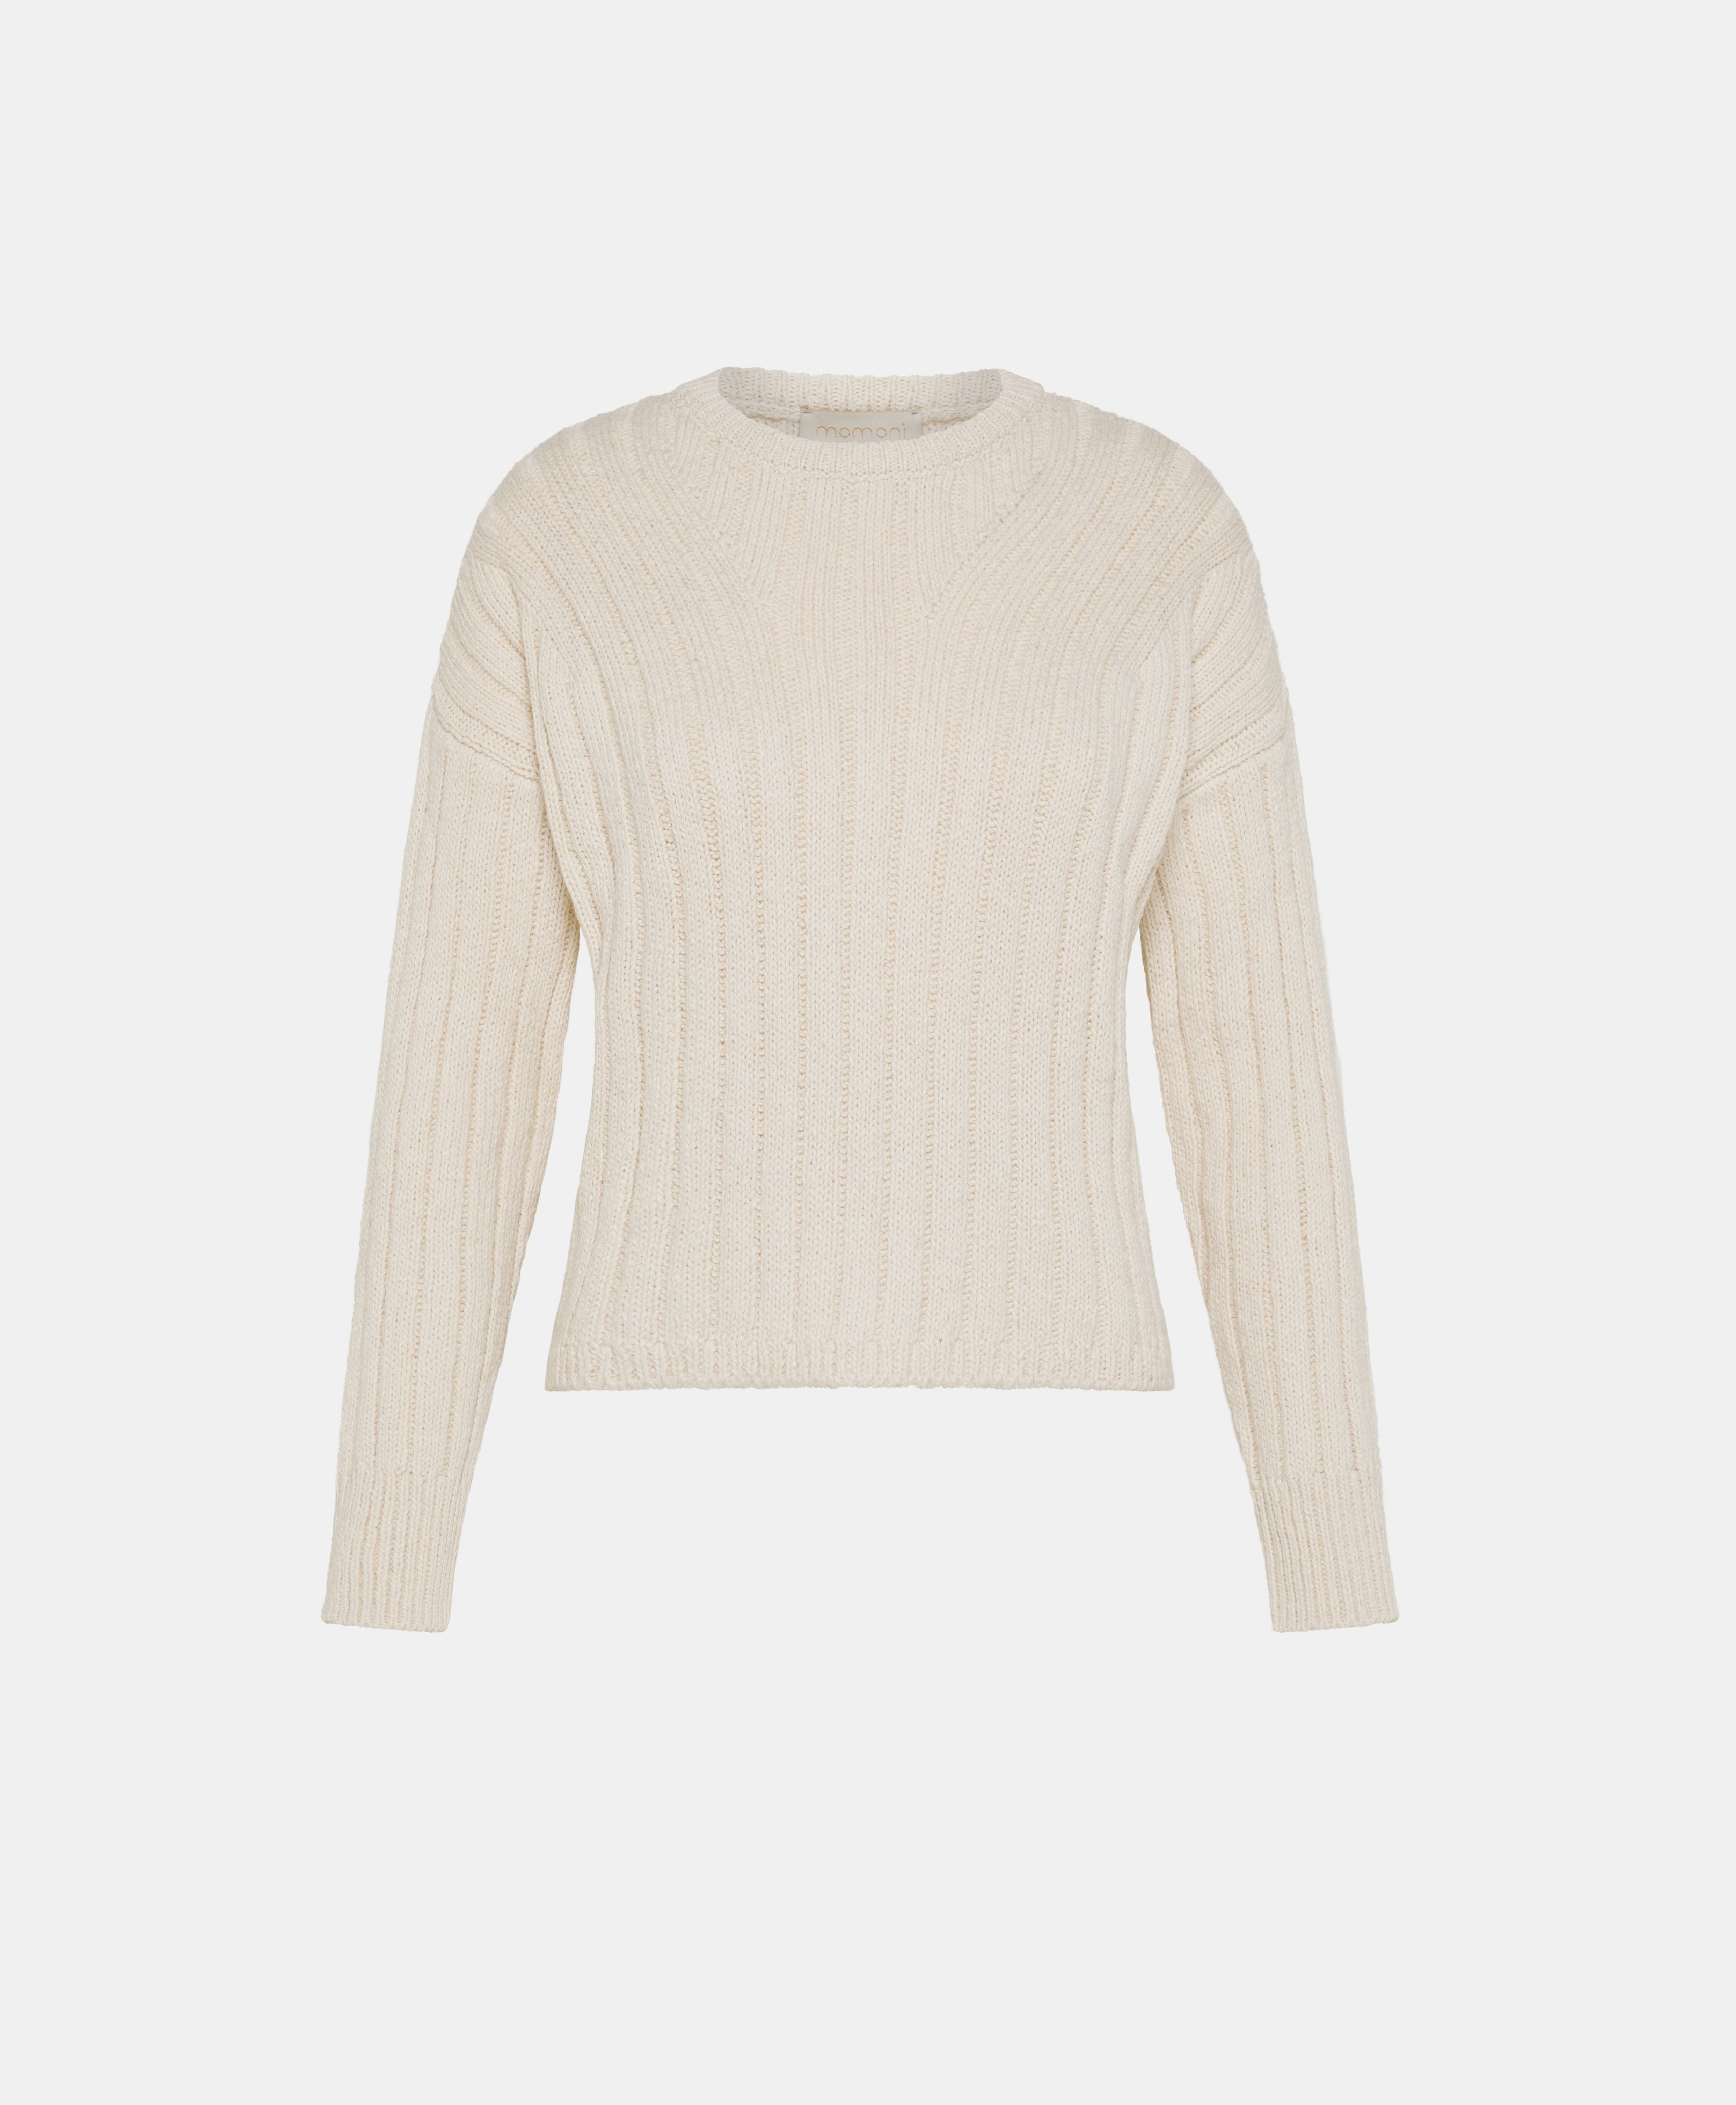 BAUMETTE KNITWEAR WITH MIXED STITCHES - CREAM - Momonì